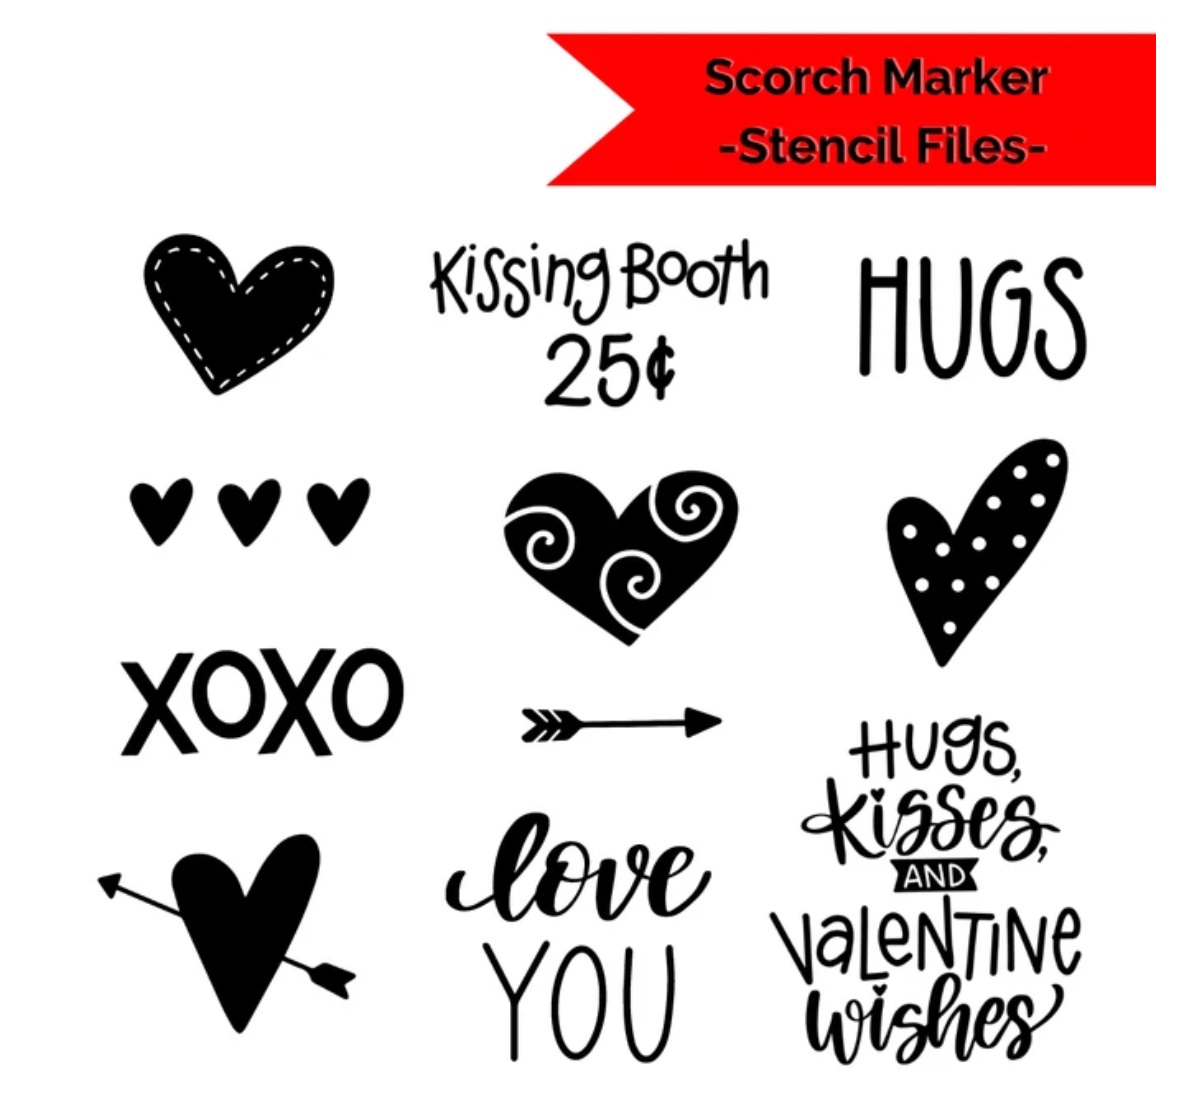 Image is a collage of 11 Valentine stencil designs, including a variety of hearts, an arrow, and some phrases.